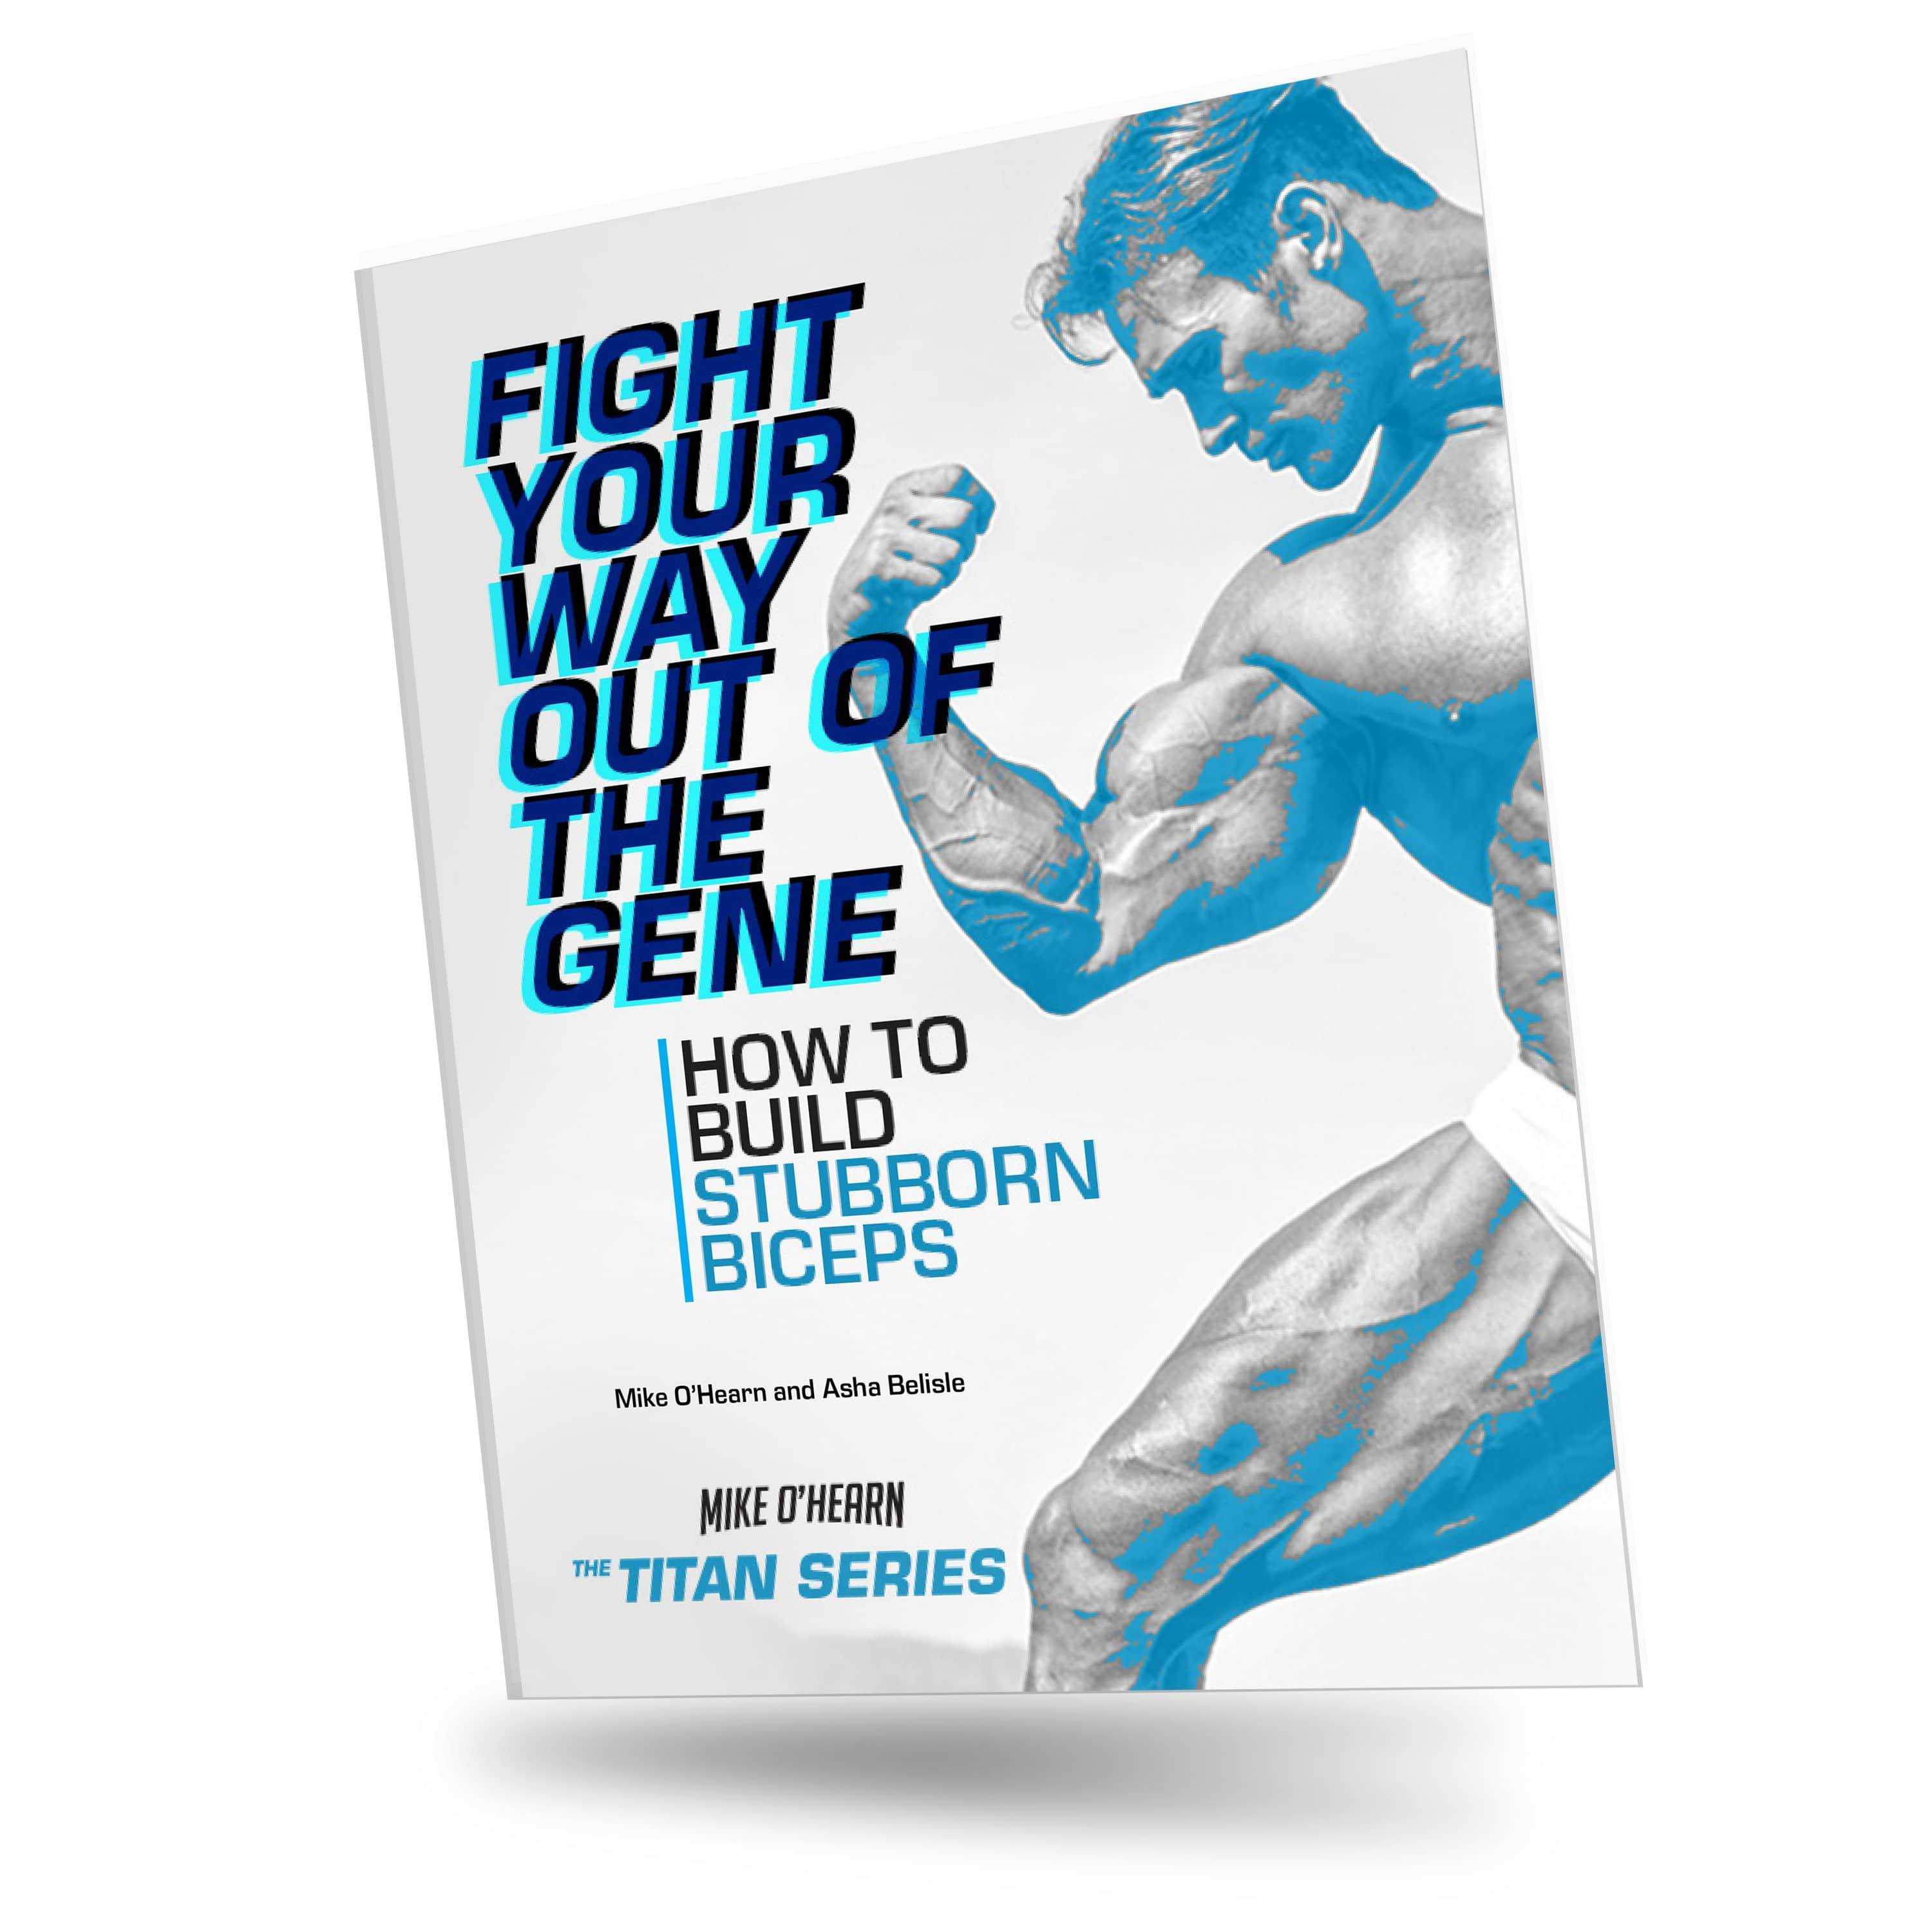 Mike O'Hearn book Fight your way out of the gene